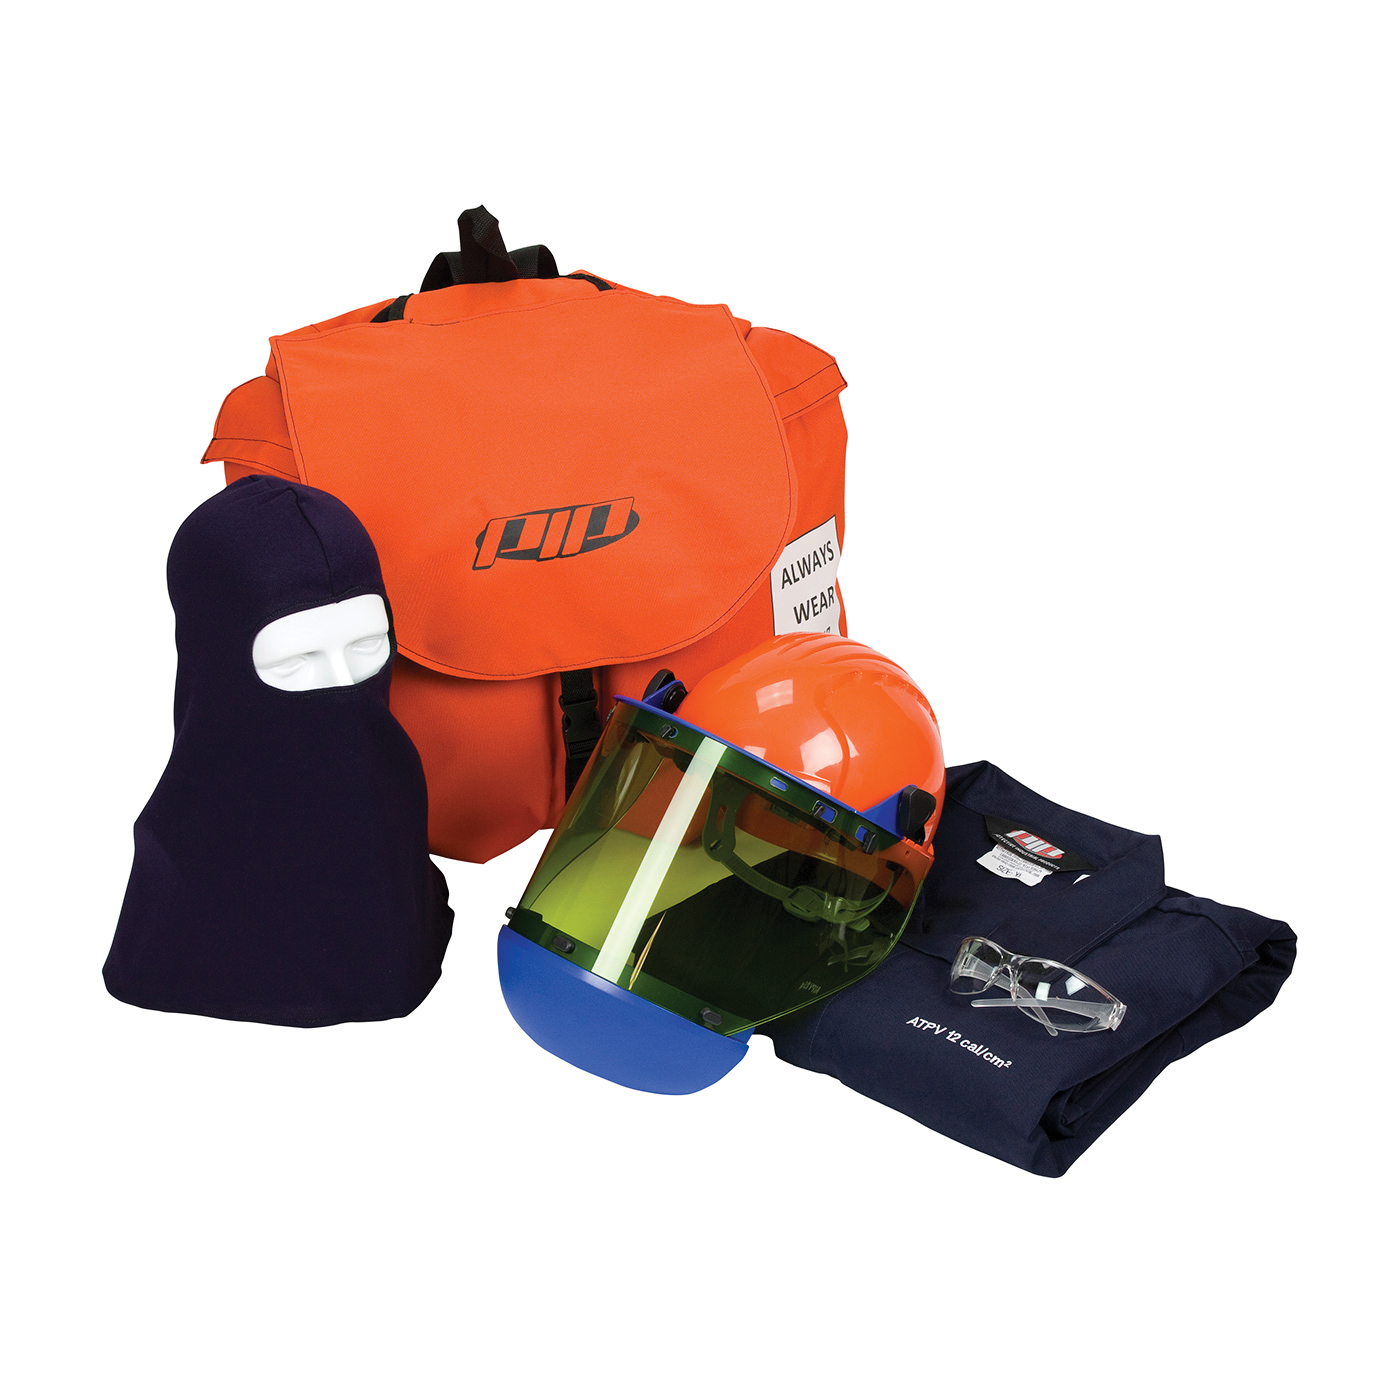 PIP® 9150-5488EB/5X Arc Flash Kit, Hazard Risk Category (HRC): 2, Hood/Face Shield Max Arc Flash Protection: 12 cal/sq-cm, Garment Max Arc Flash Protection: 12 cal/sq-cm, Specifications Met: NFPA 70E-2018, Arc Shield/Hard Hat Head/Face Protection